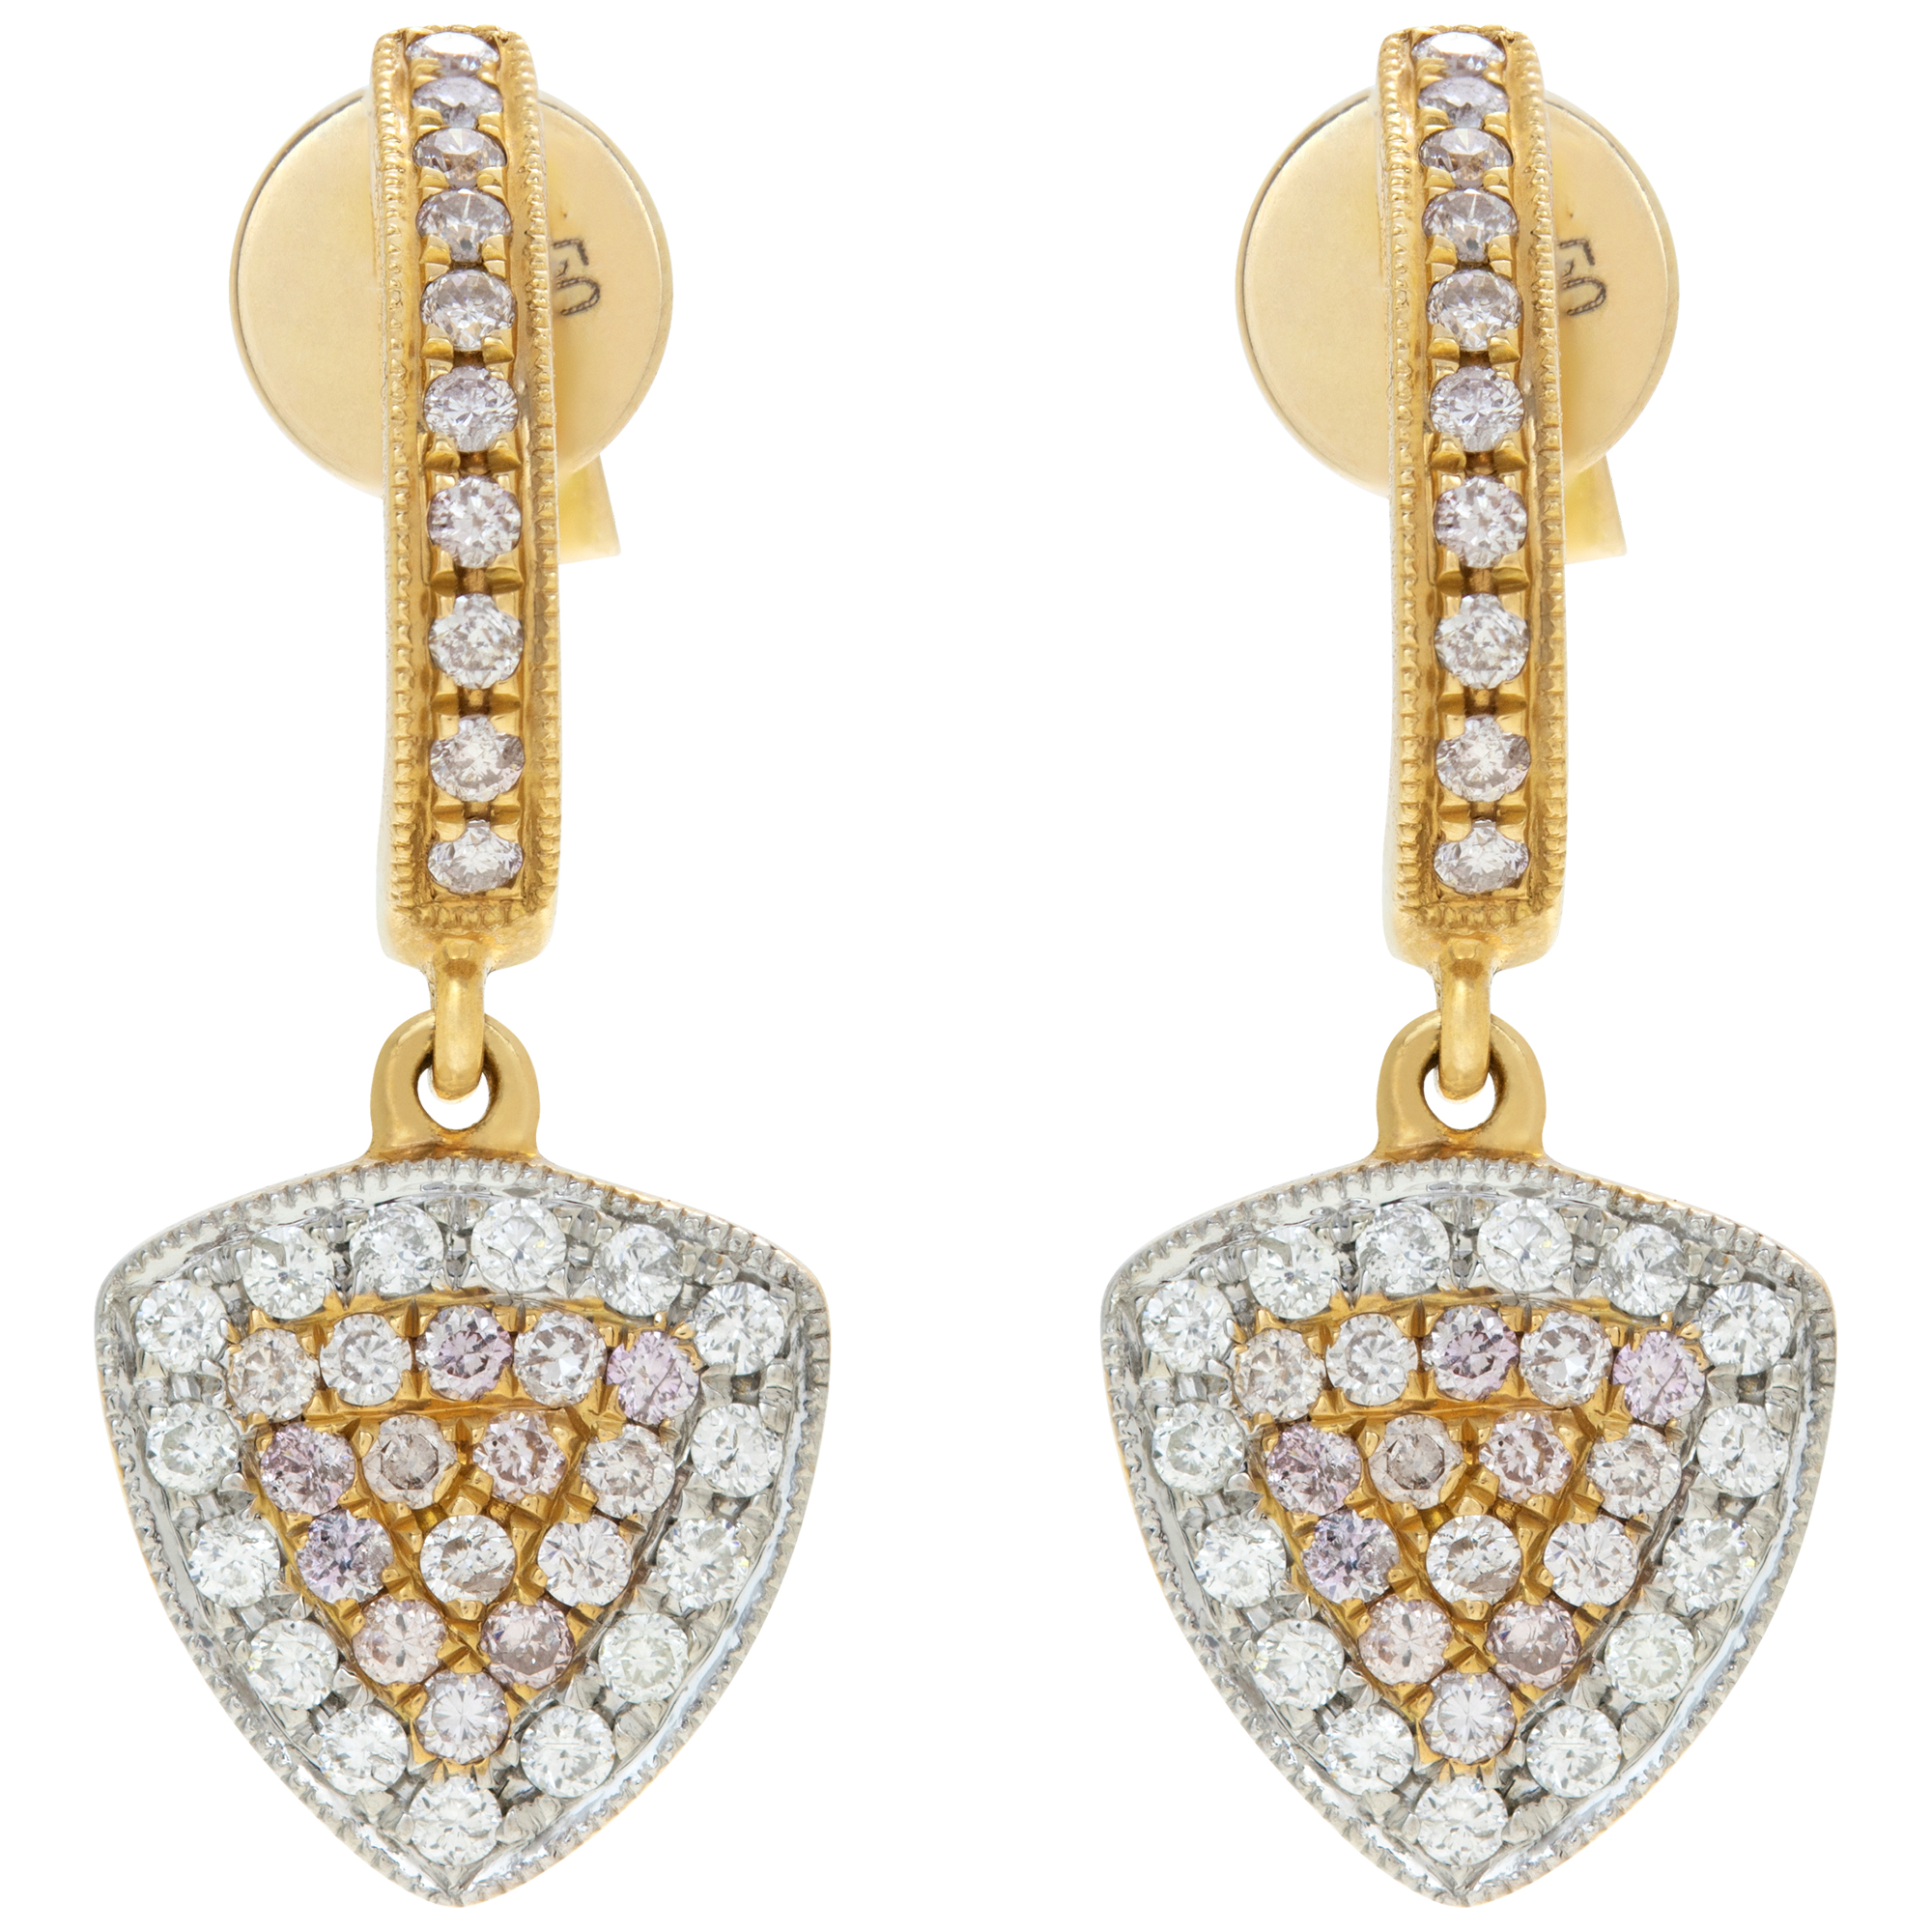 Yellow and white diamond earrings in 18k white & yellow gold image 1